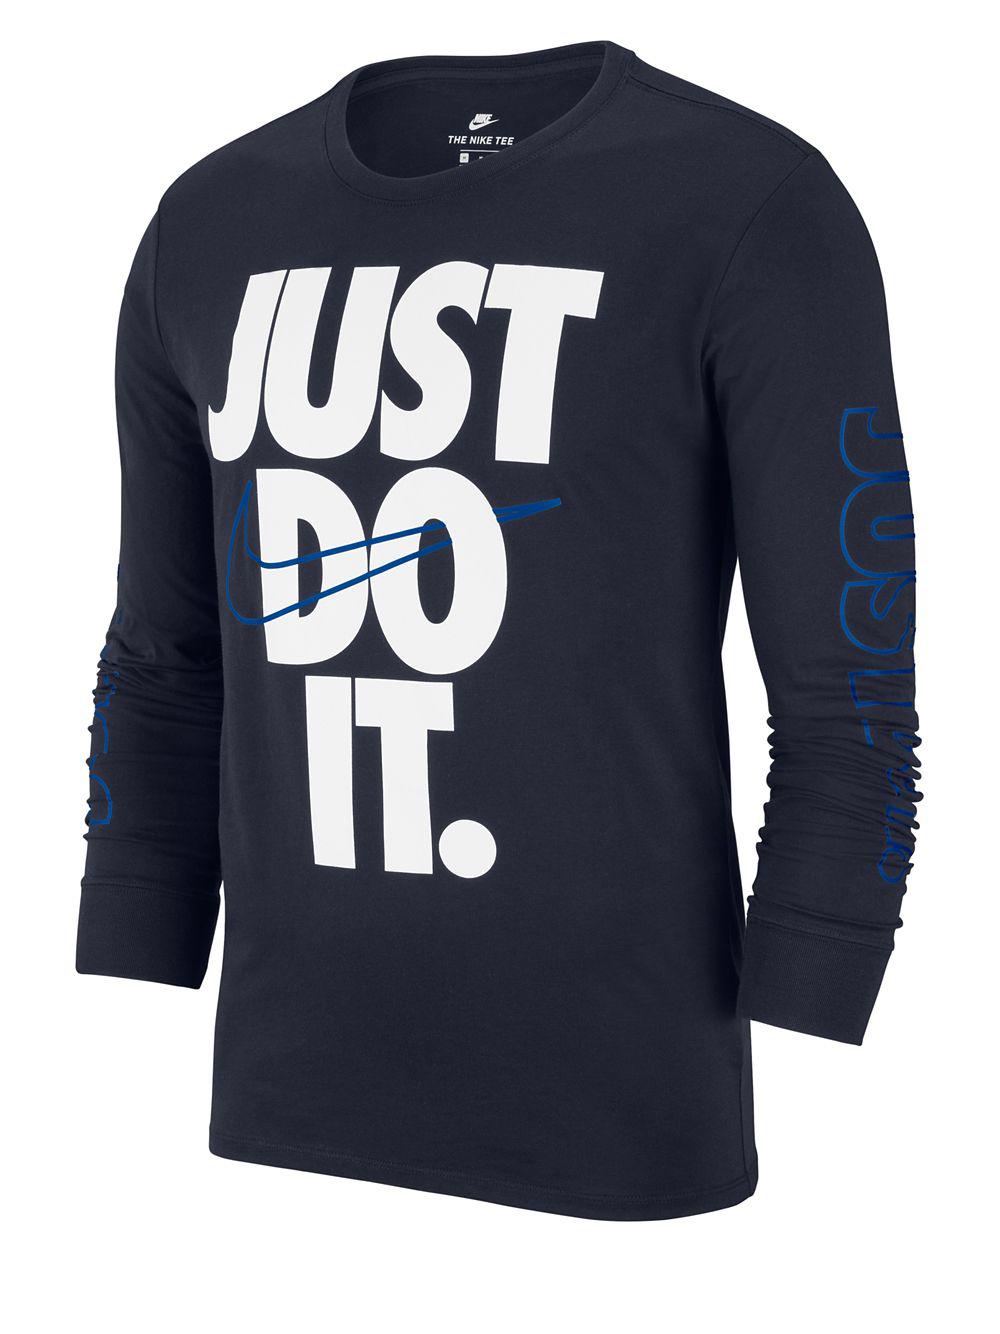 Nike Graphic Cotton Tee in Blue for Men - Lyst